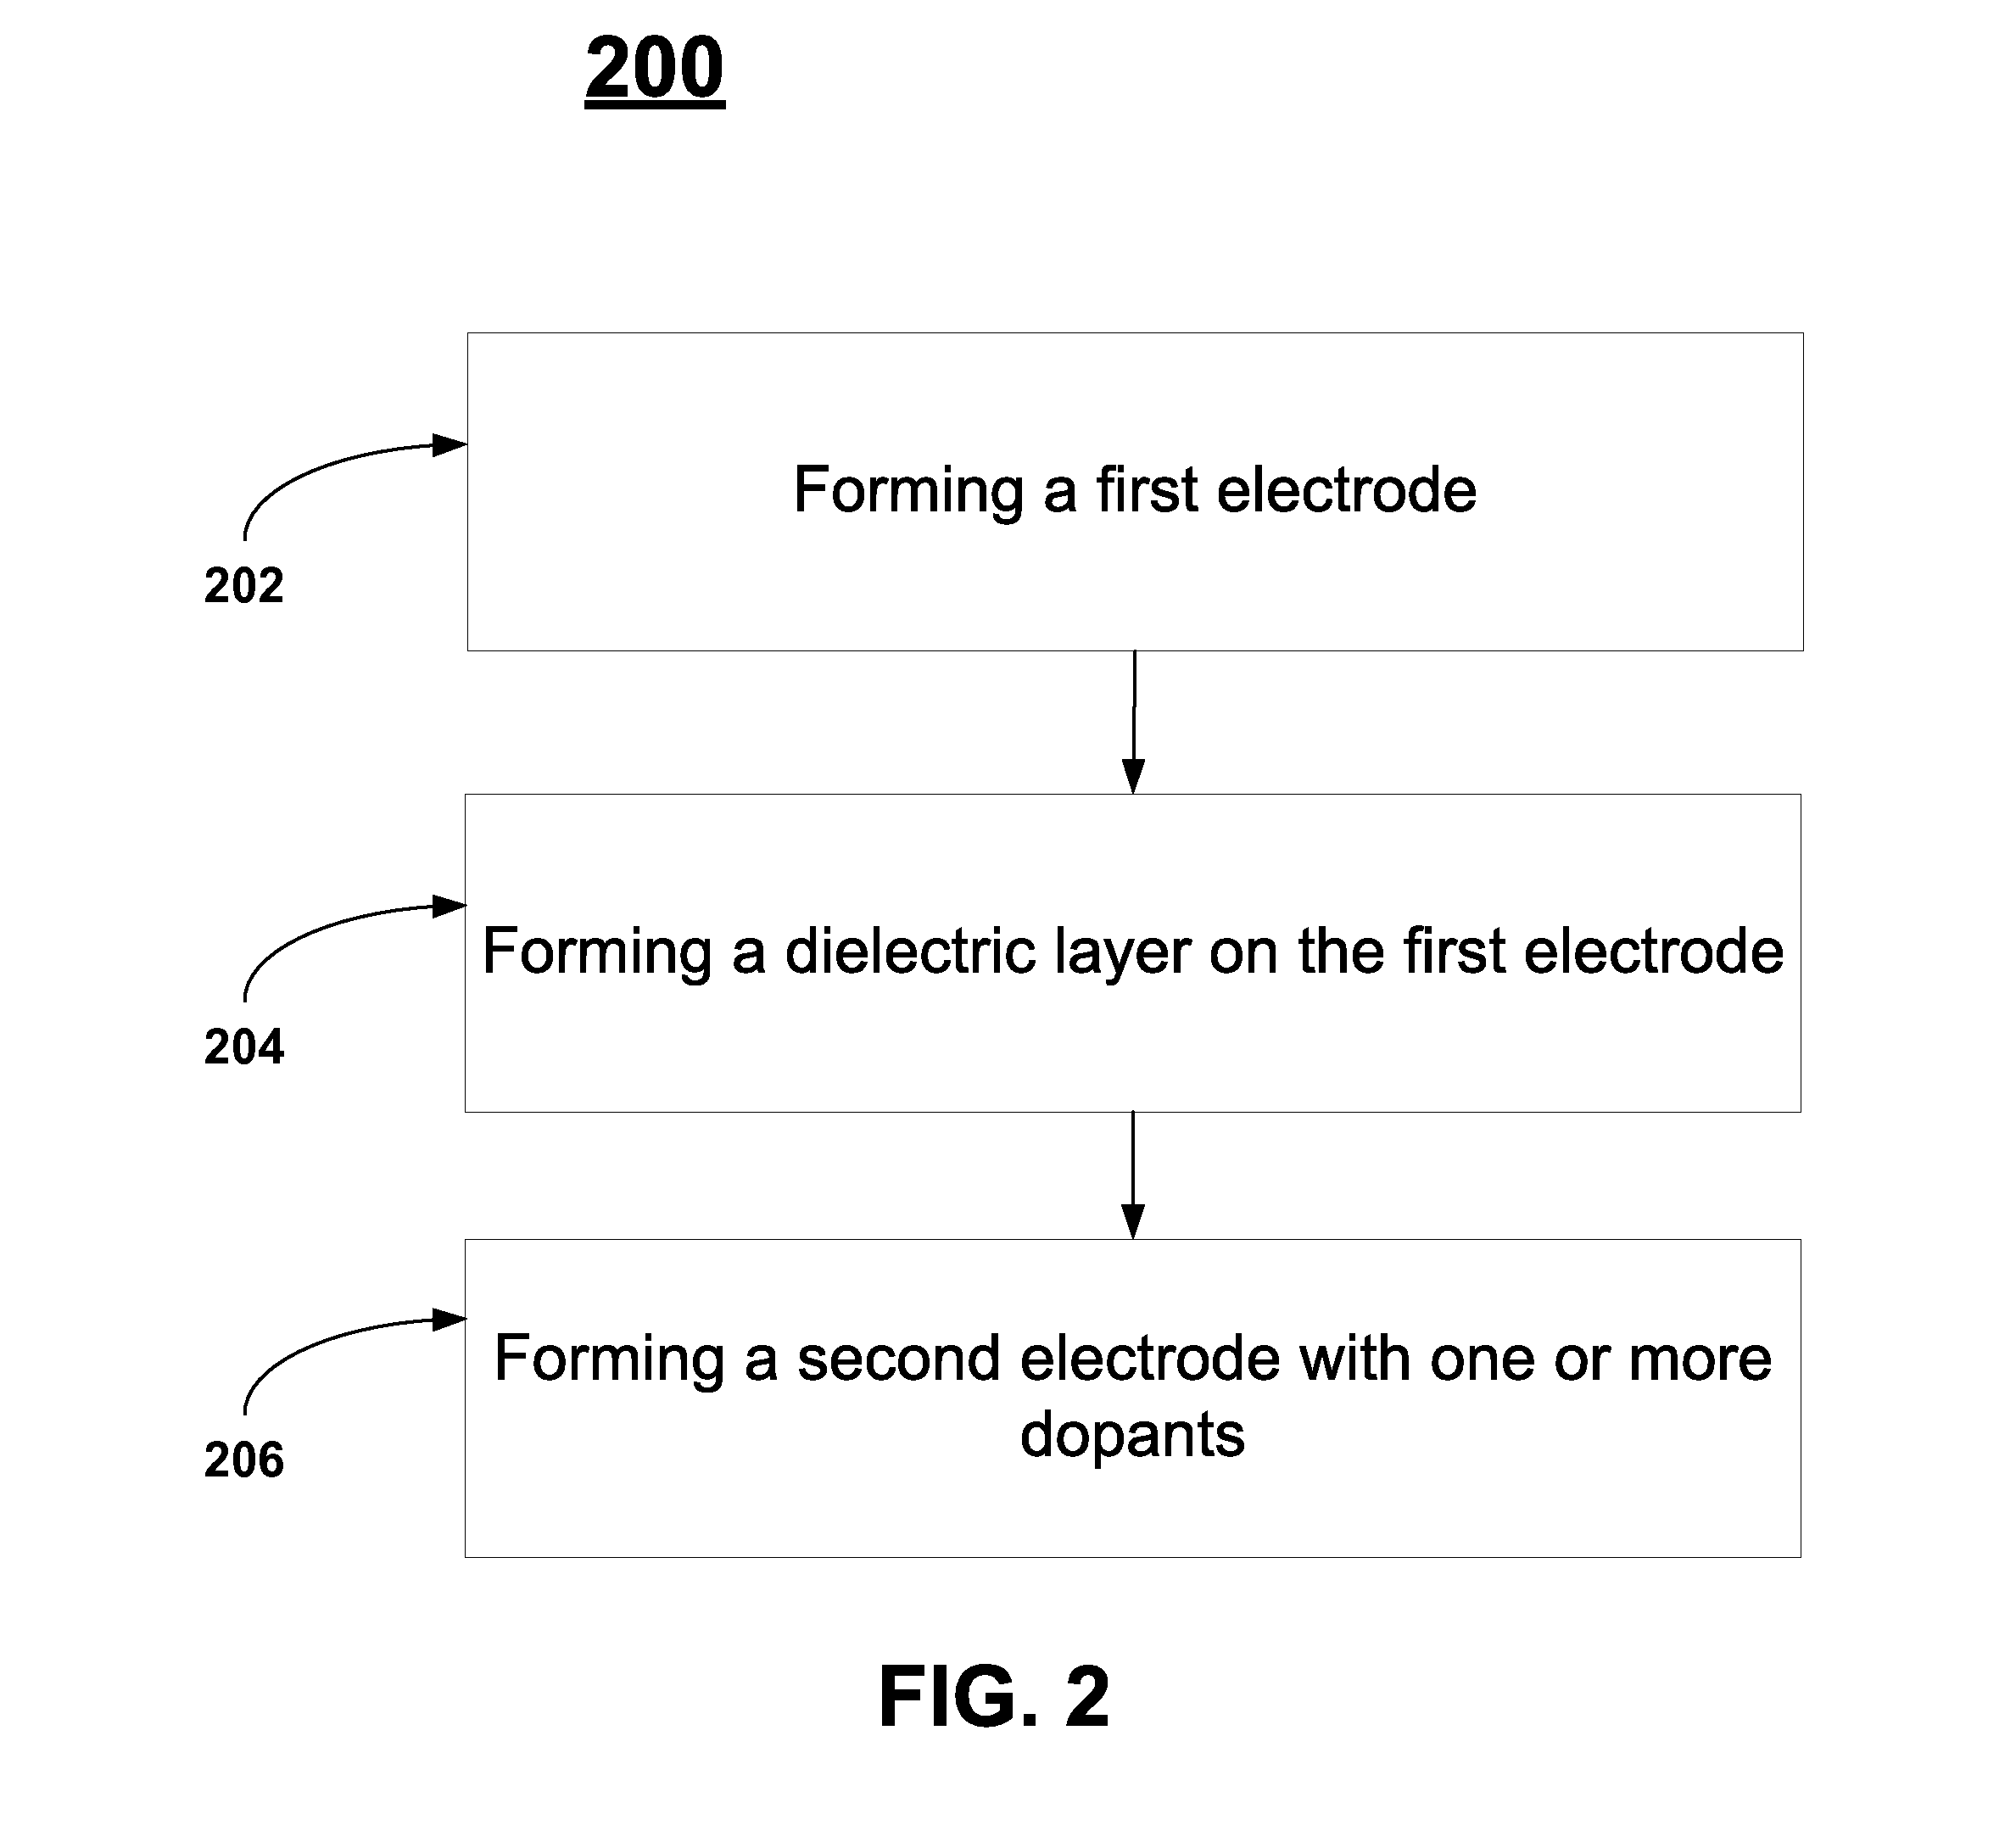 Enhanced non-noble electrode layers for dram capacitor cell